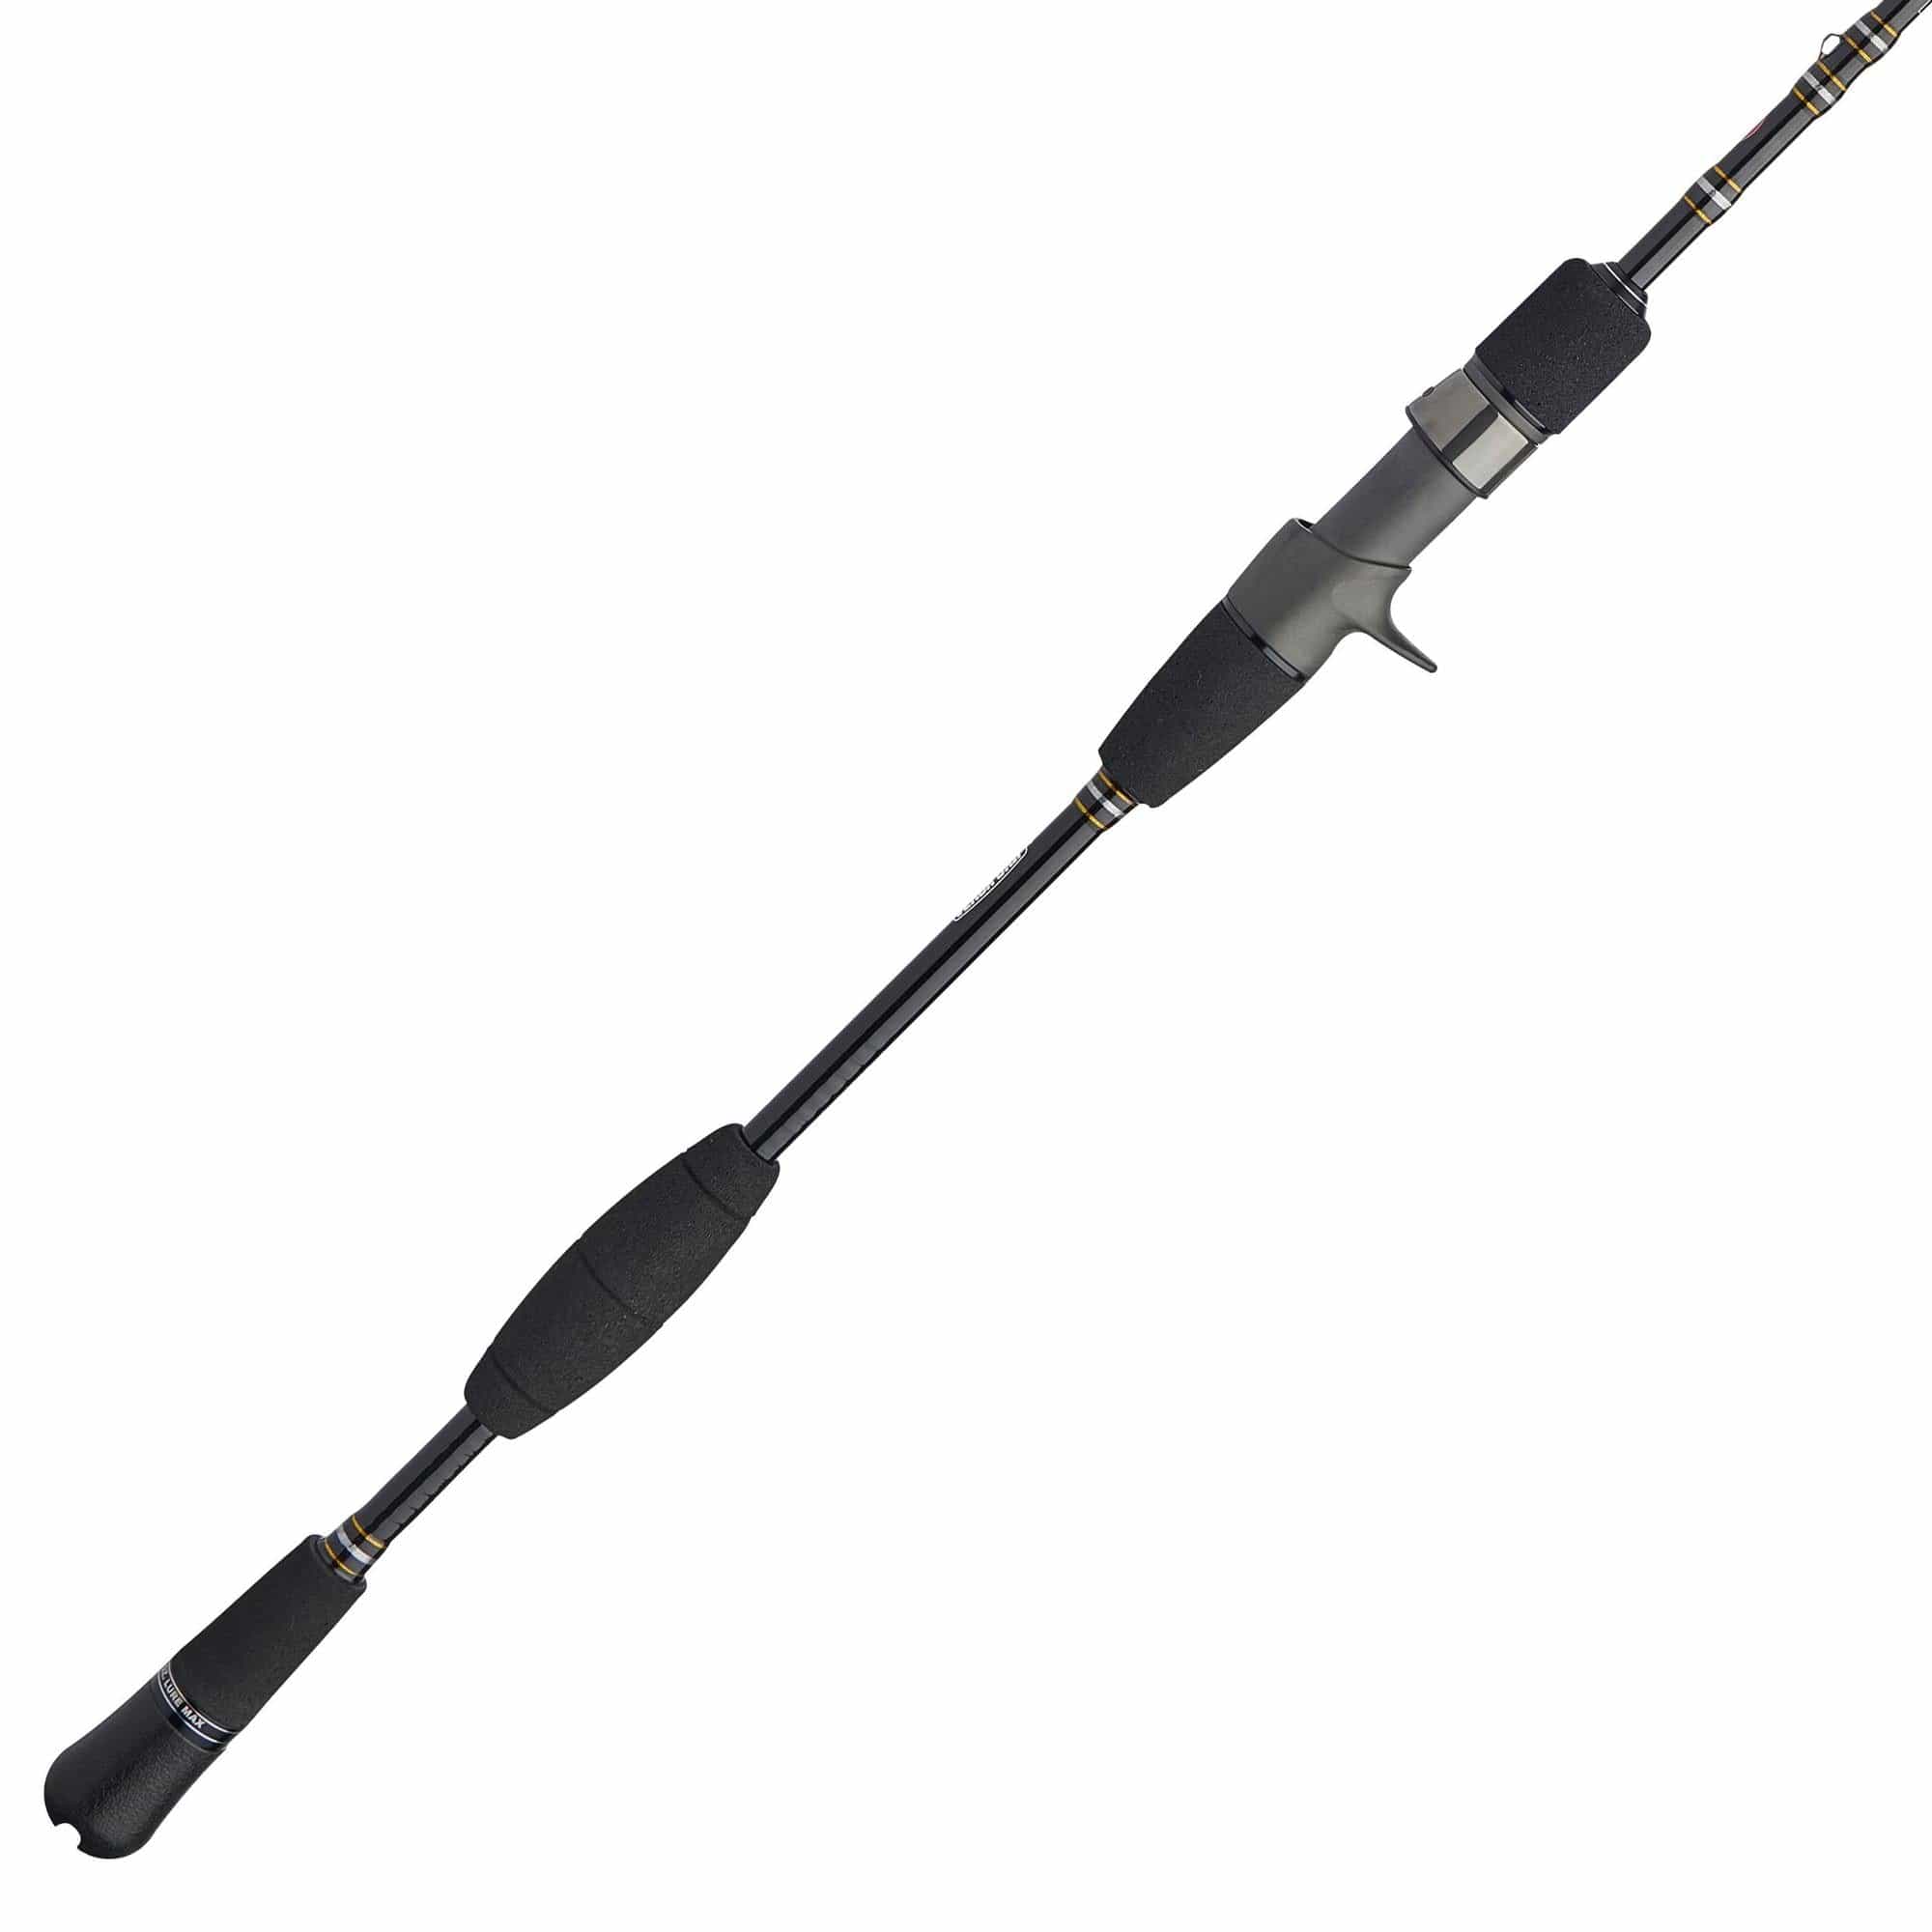 Penn Carnage III Slow Pitch Rod - Conventional - The Saltwater Edge